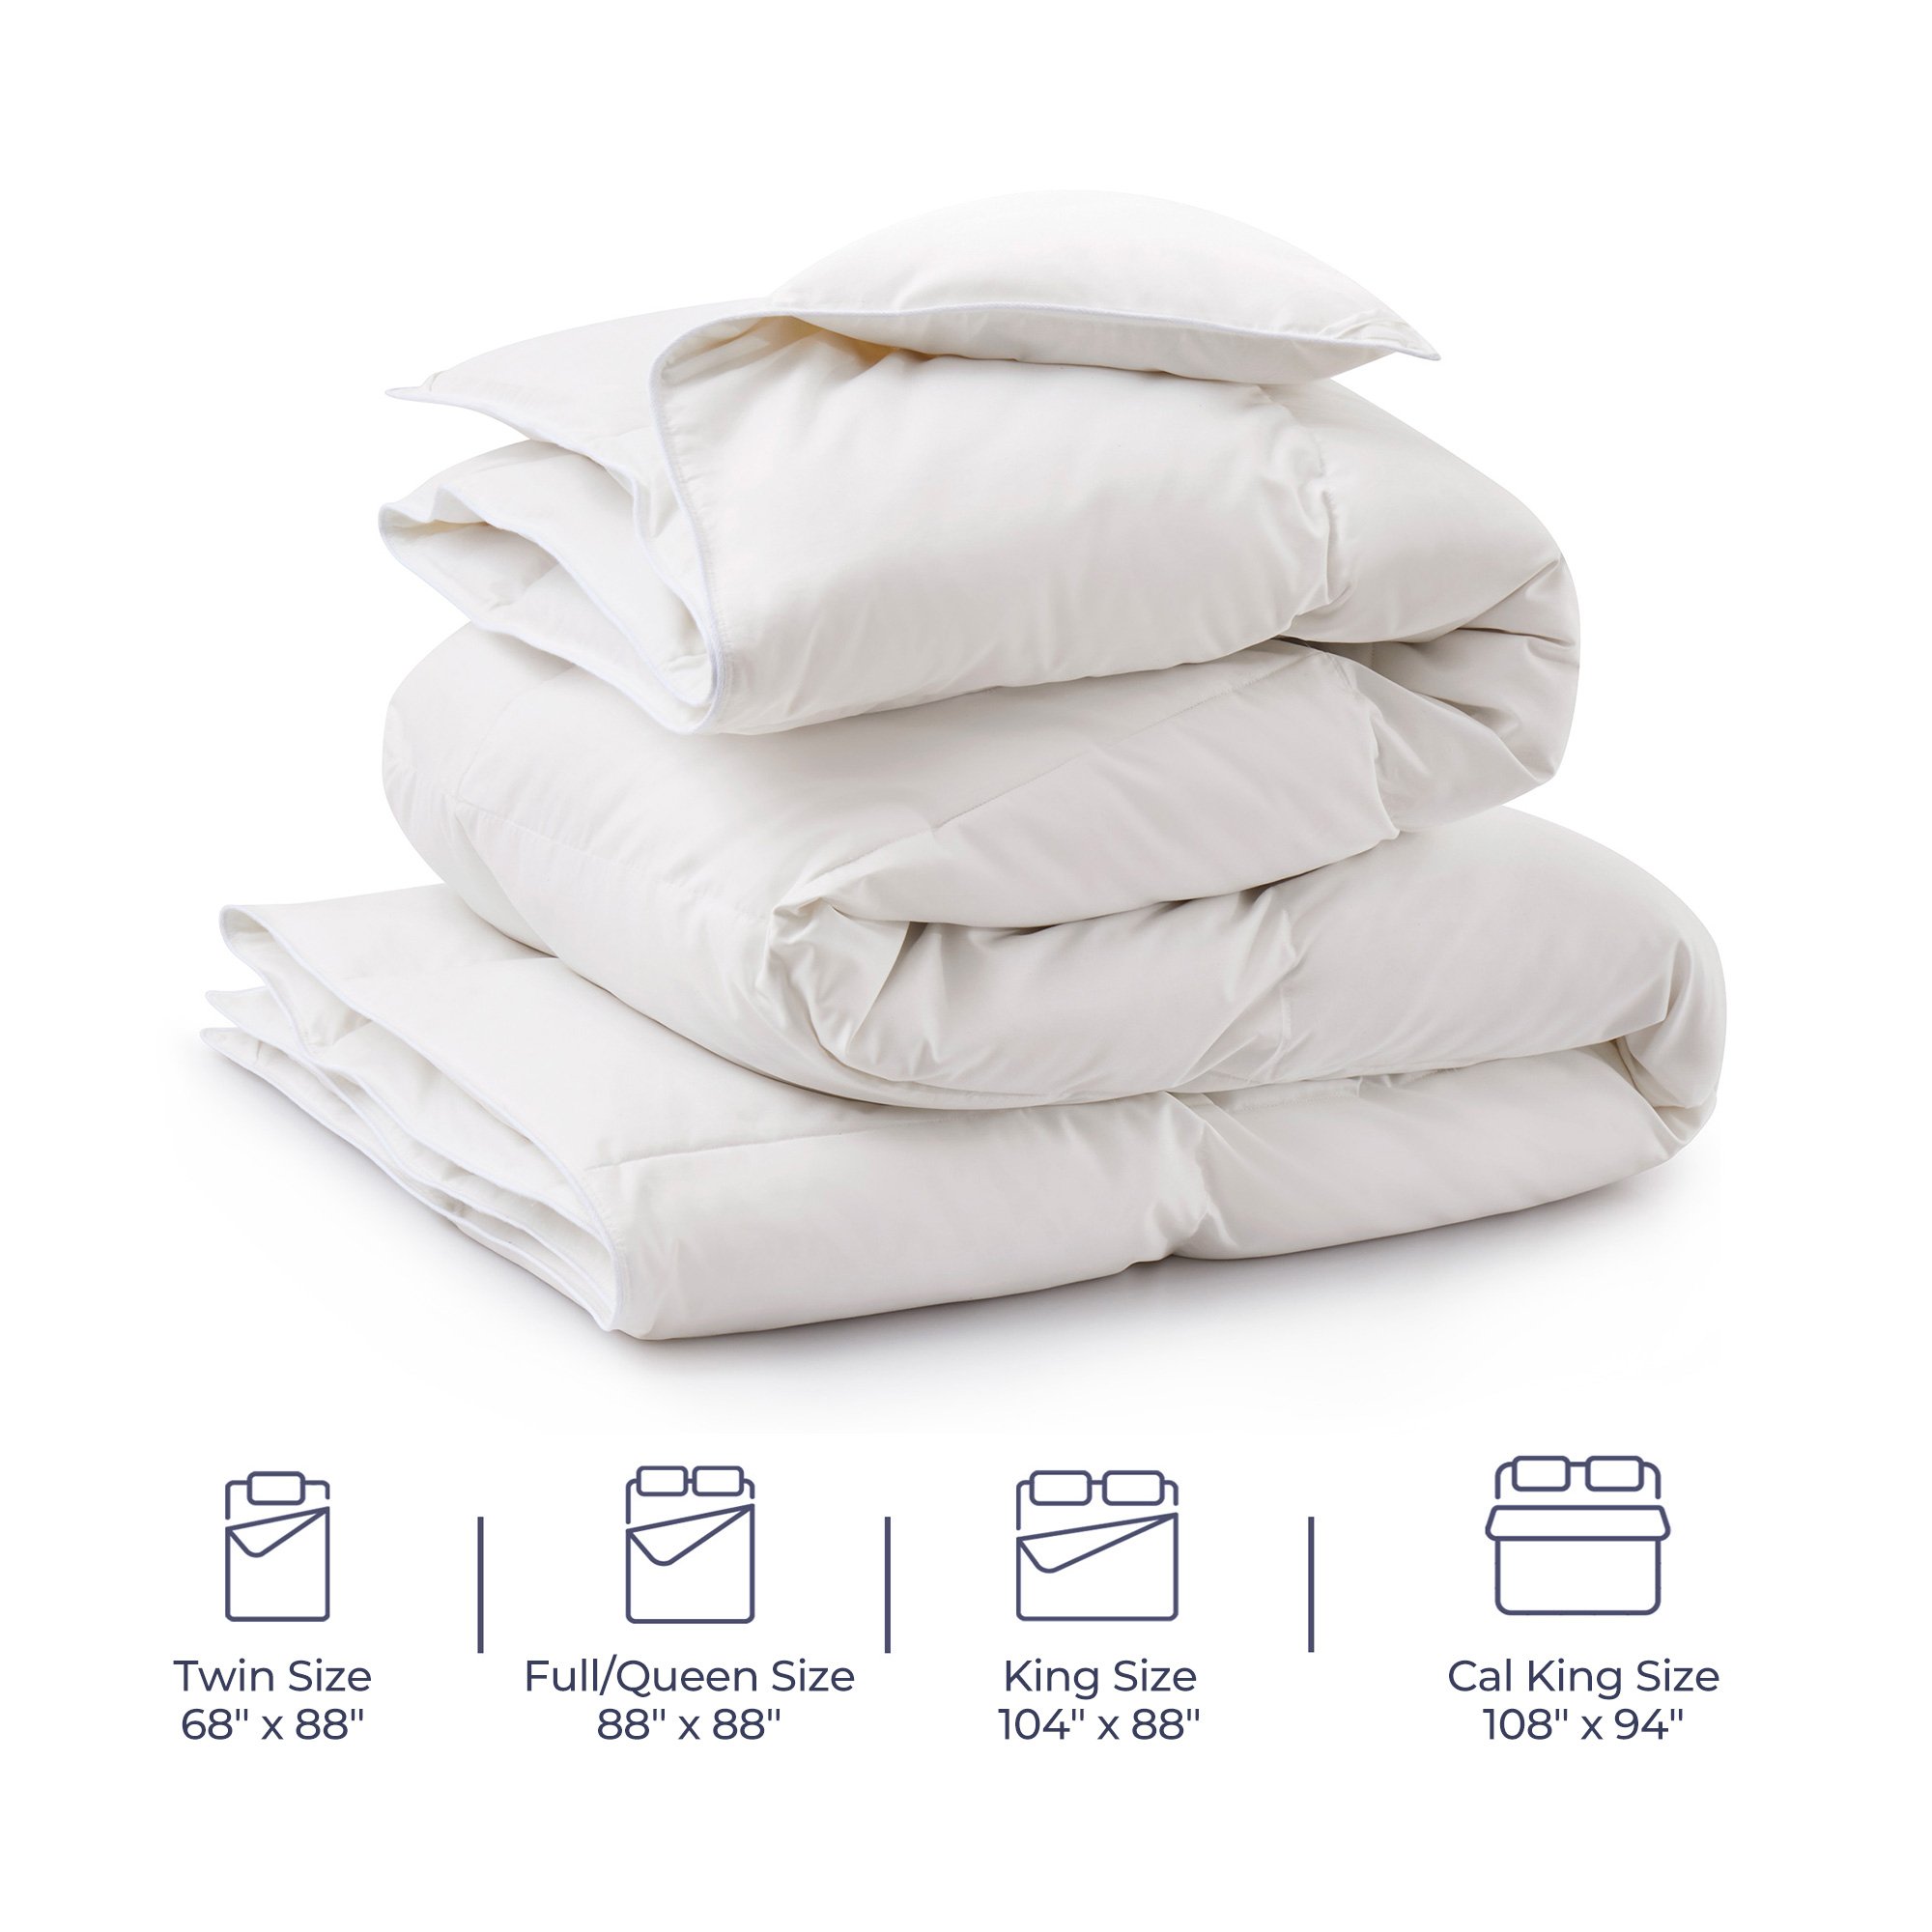 Premium All Seasons White Goose Feather Fiber And Down Comforter - Lucent White, Twin